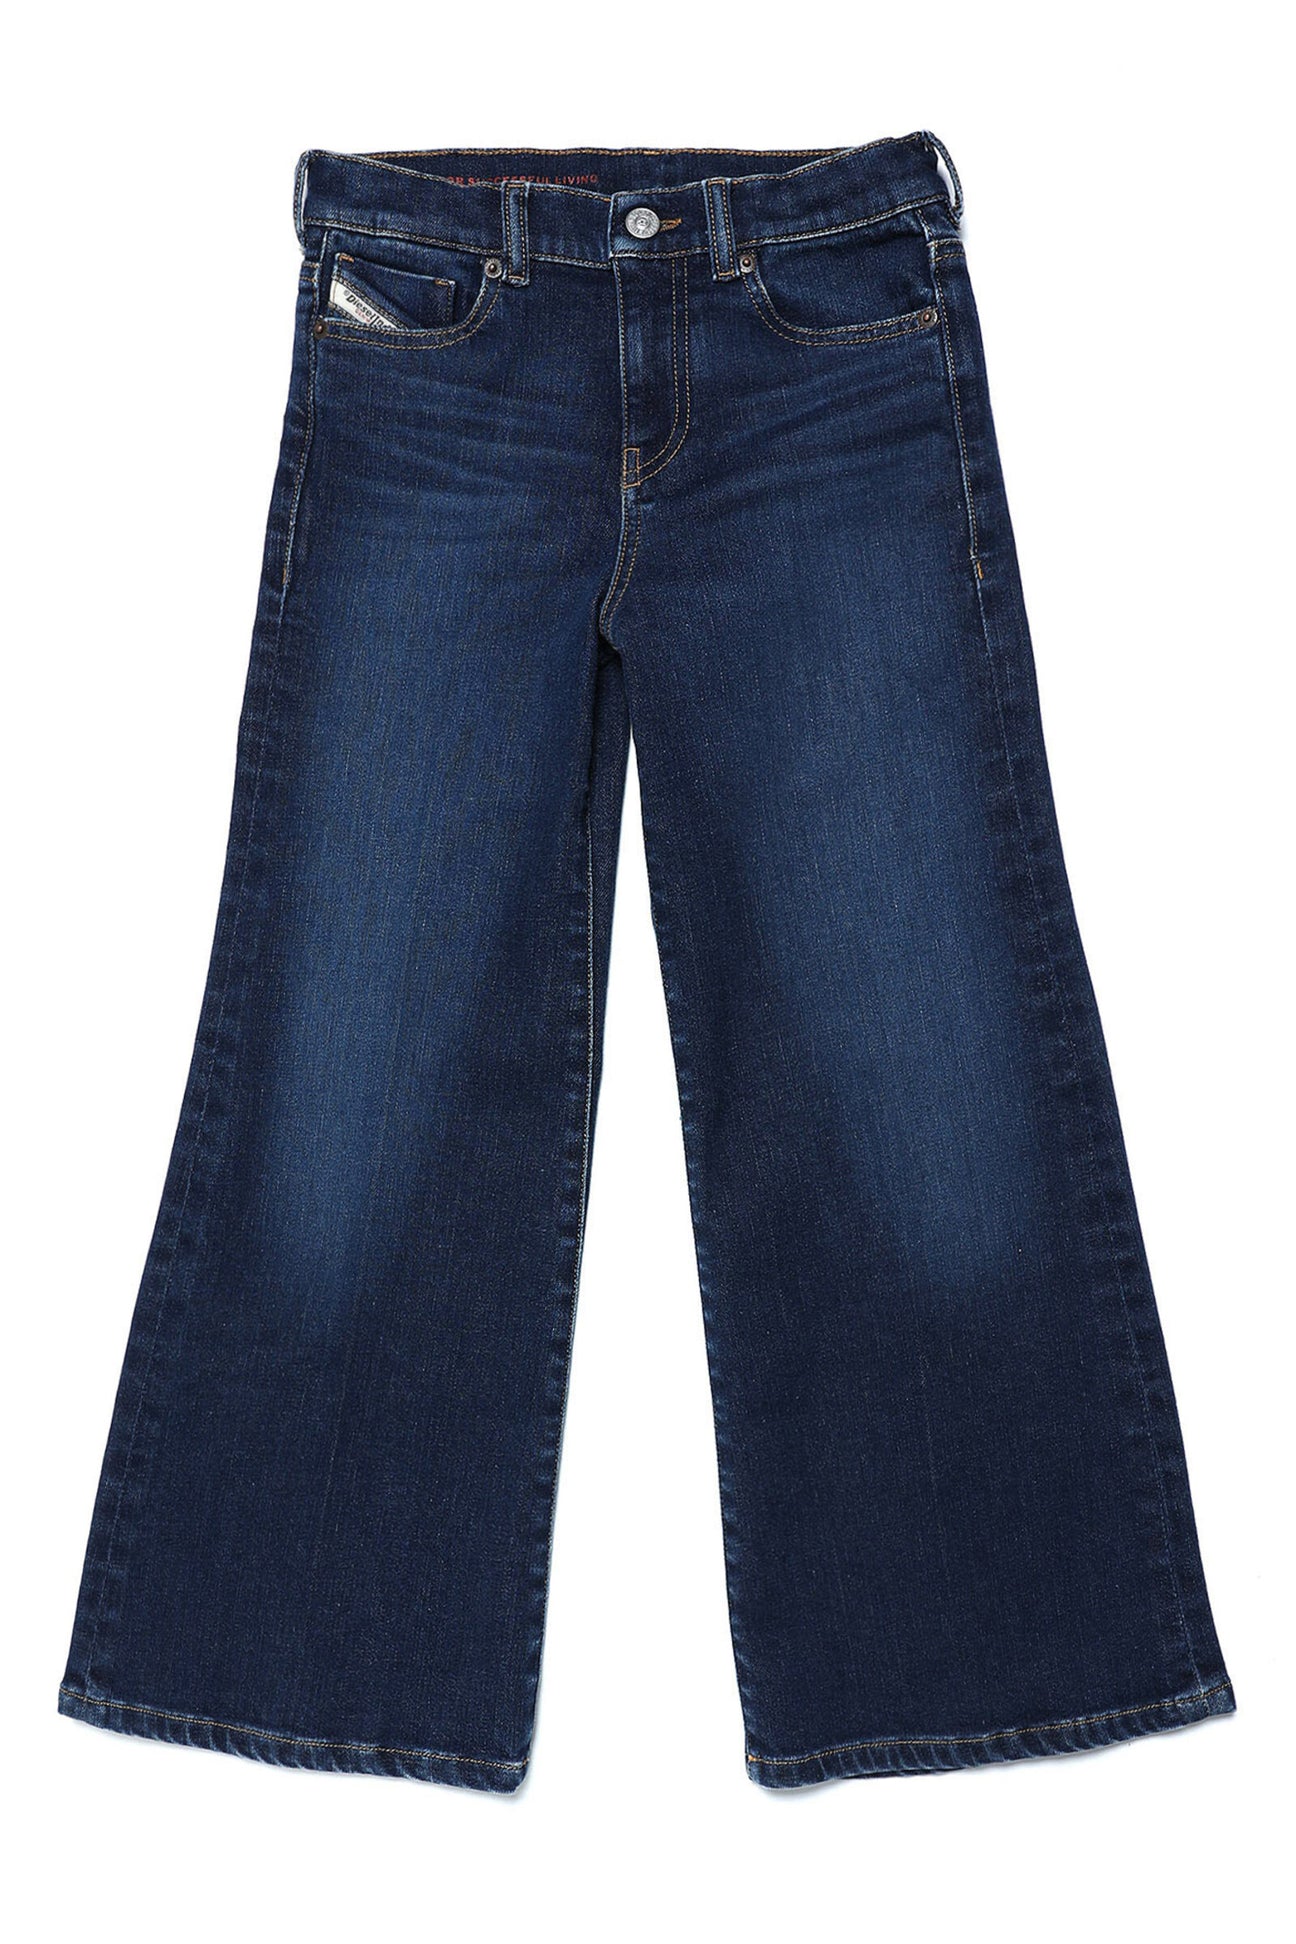 Jeans 1978 Flare Shaded 